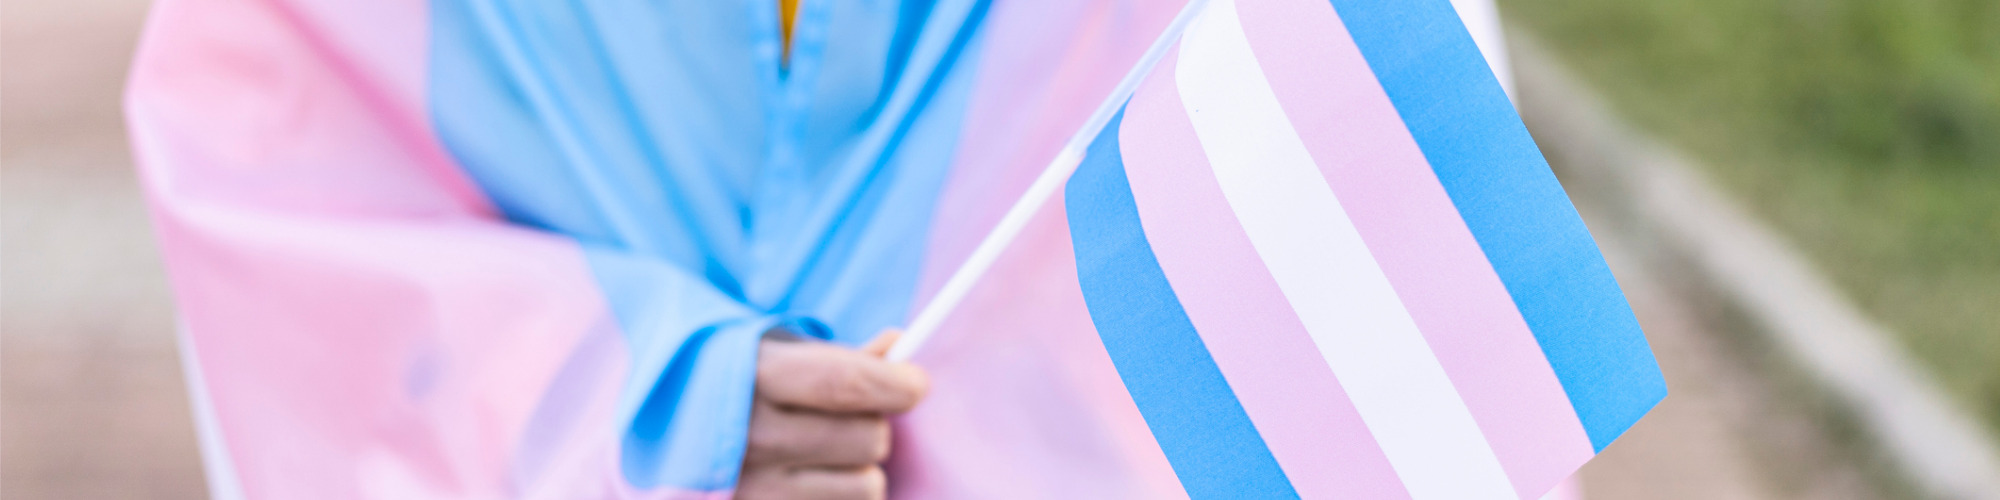 Supporting Transgender Employees in the Workplace - Key Considerations & Guidance